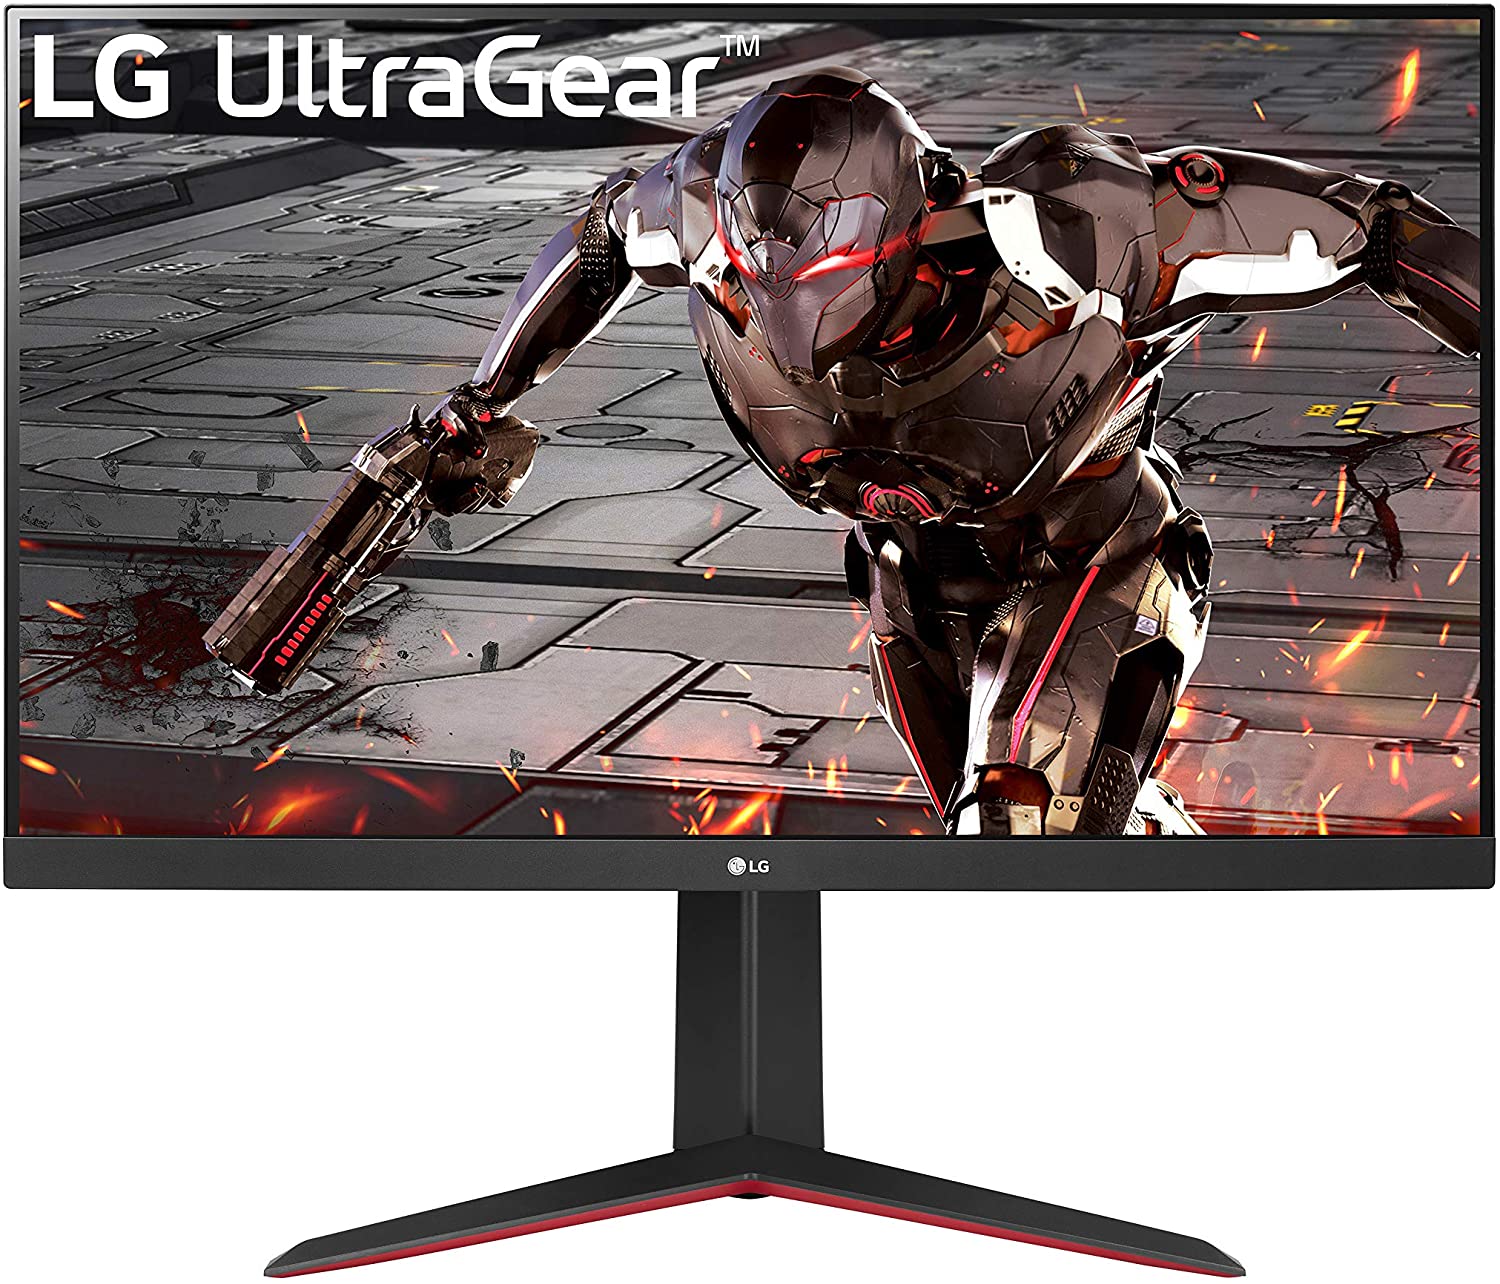 LG 32GN650-B 32” 165Hz Ultragear QHD (2560 x 1440) Gaming Monitor with 1ms Motion Blur Reduction, HDR 10 Support and AMD FreeSync – Black $296.99